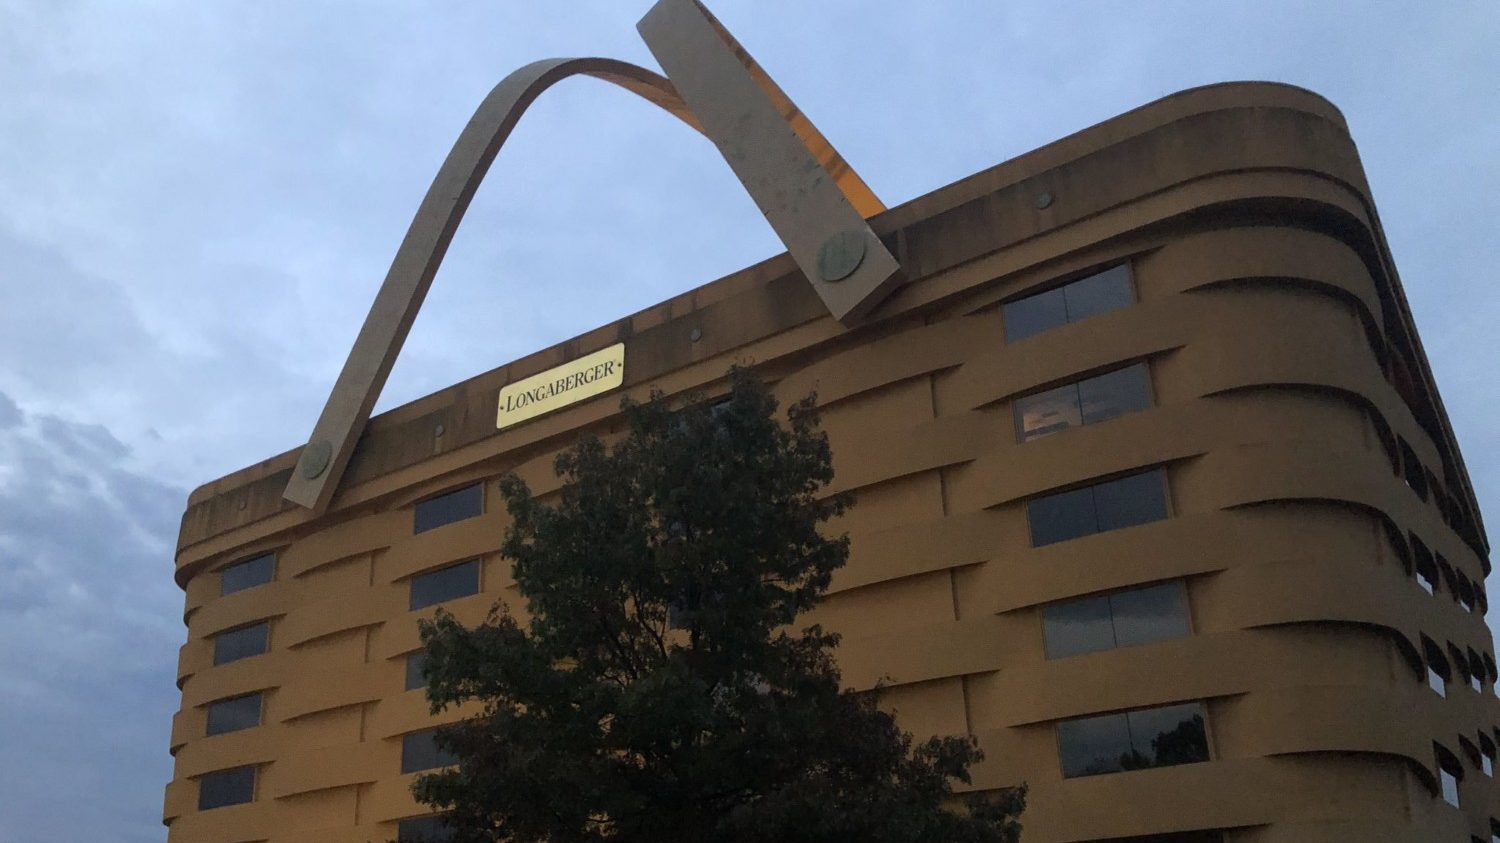 Longaberger Basket Building Being Turned Into Hotel Simplemost,Cheapest Cities In Us To Visit